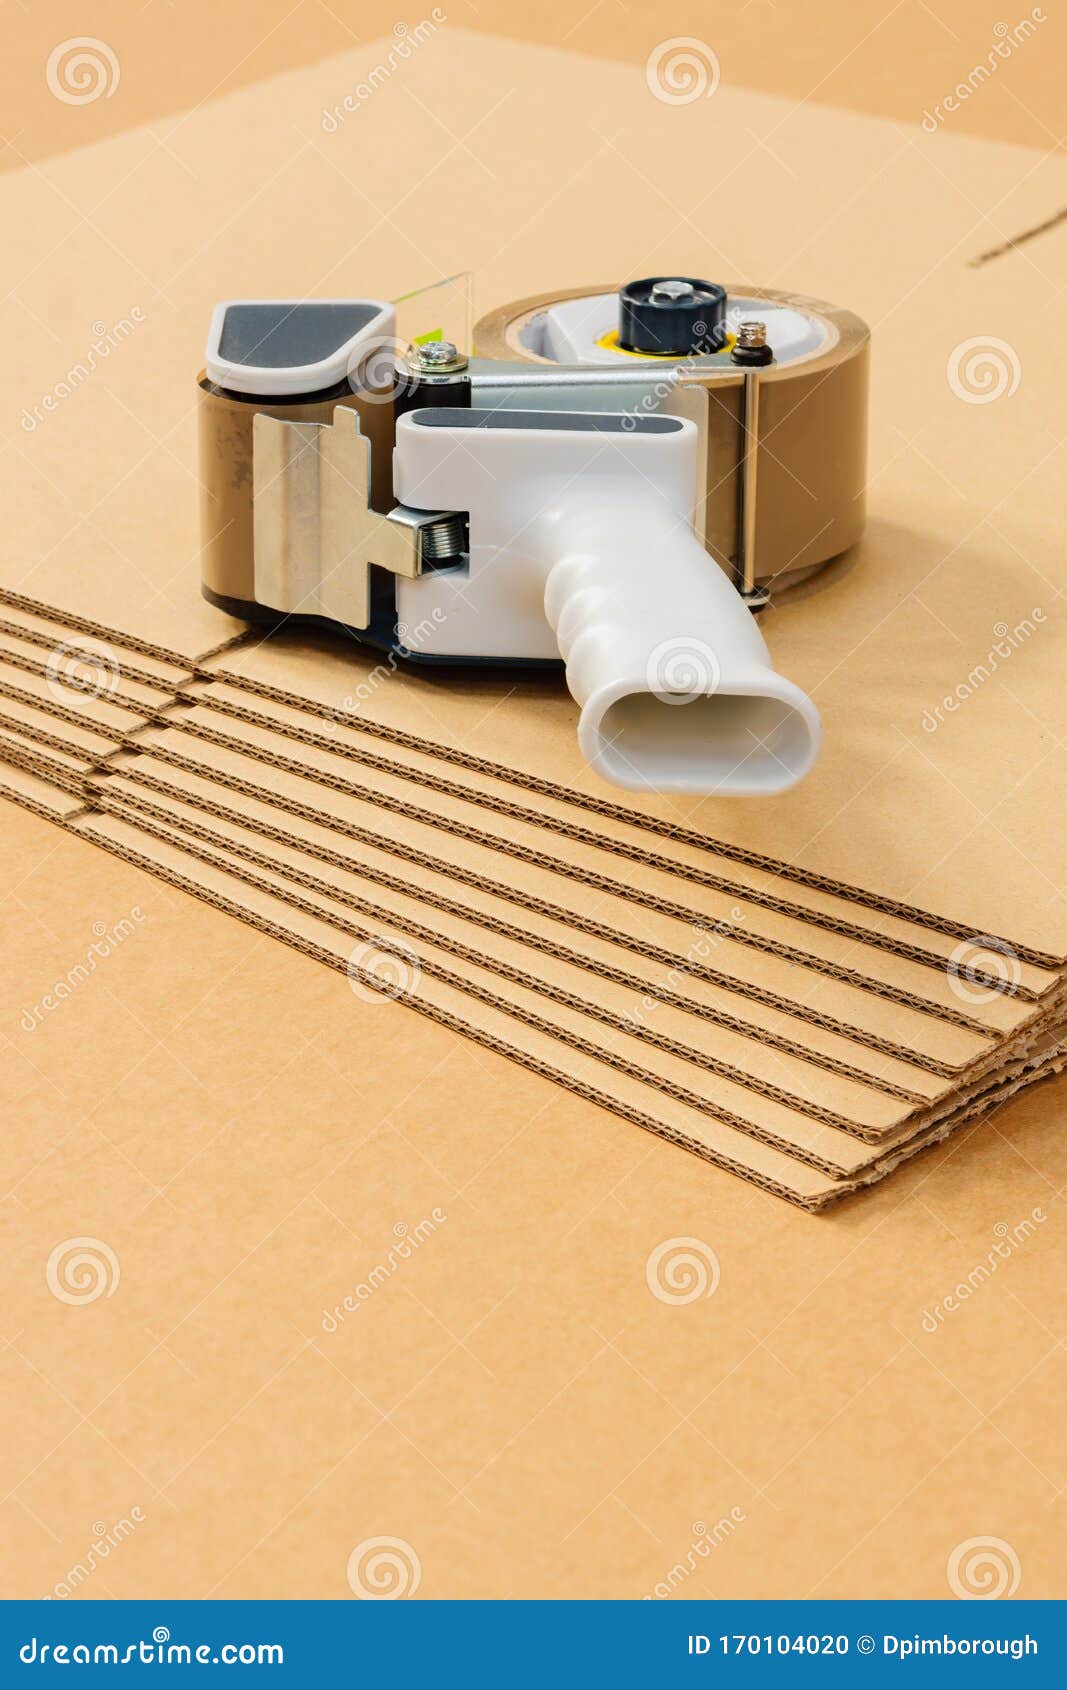 Industrial Cardboard Boxes And Tape Dispenser Stock Photo Image